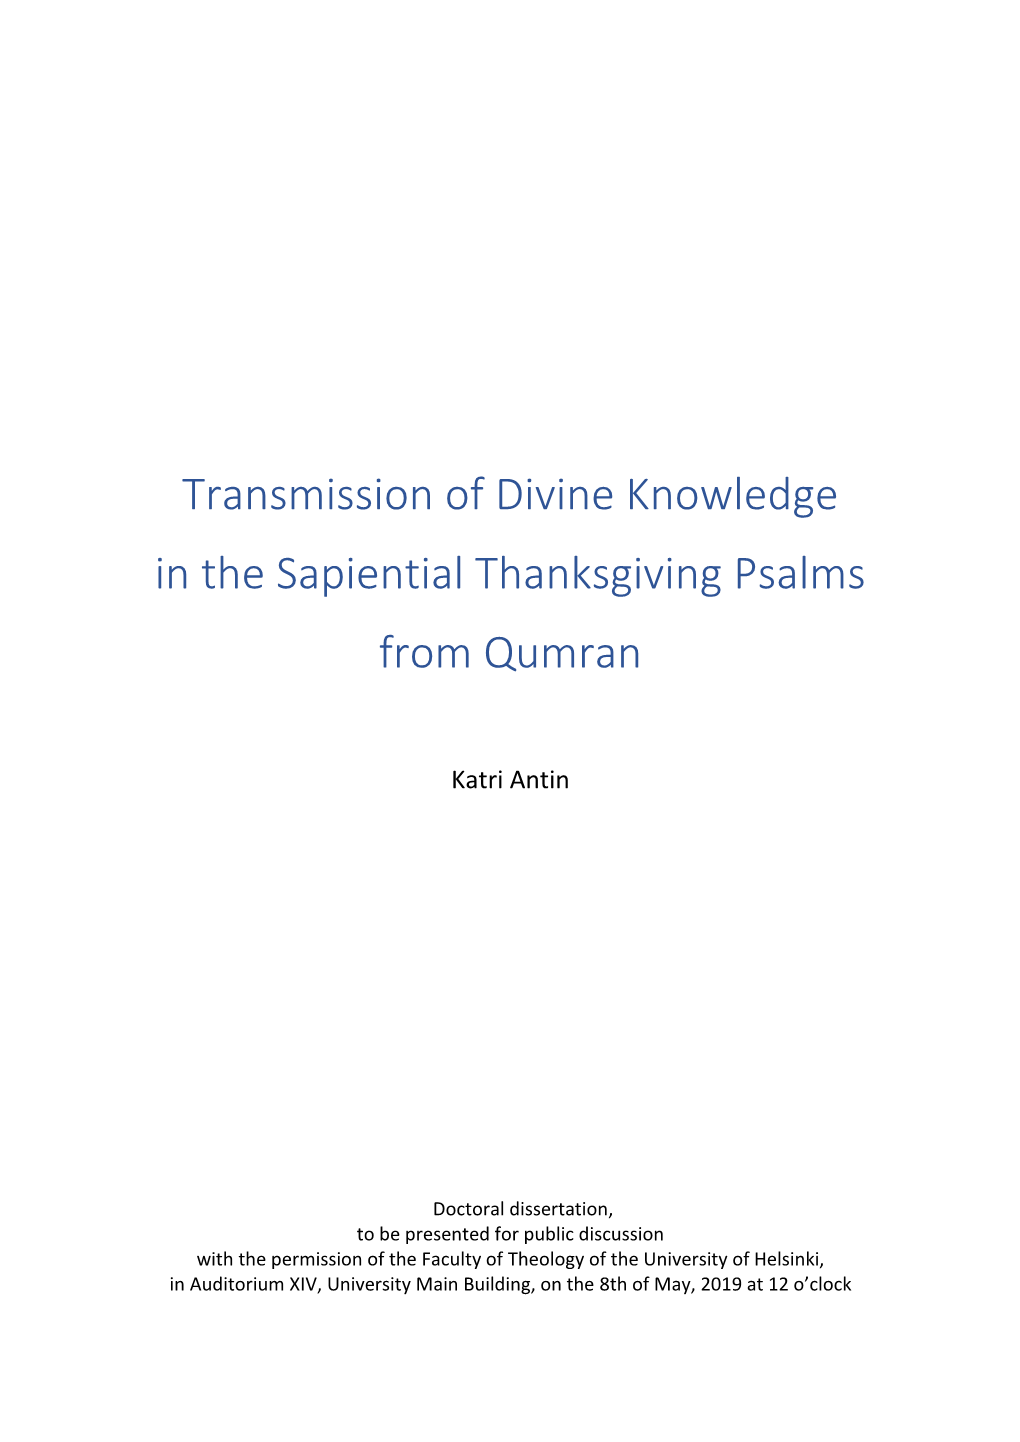 Transmission of Divine Knowledge in the Sapiential Thanksgiving Psalms from Qumran